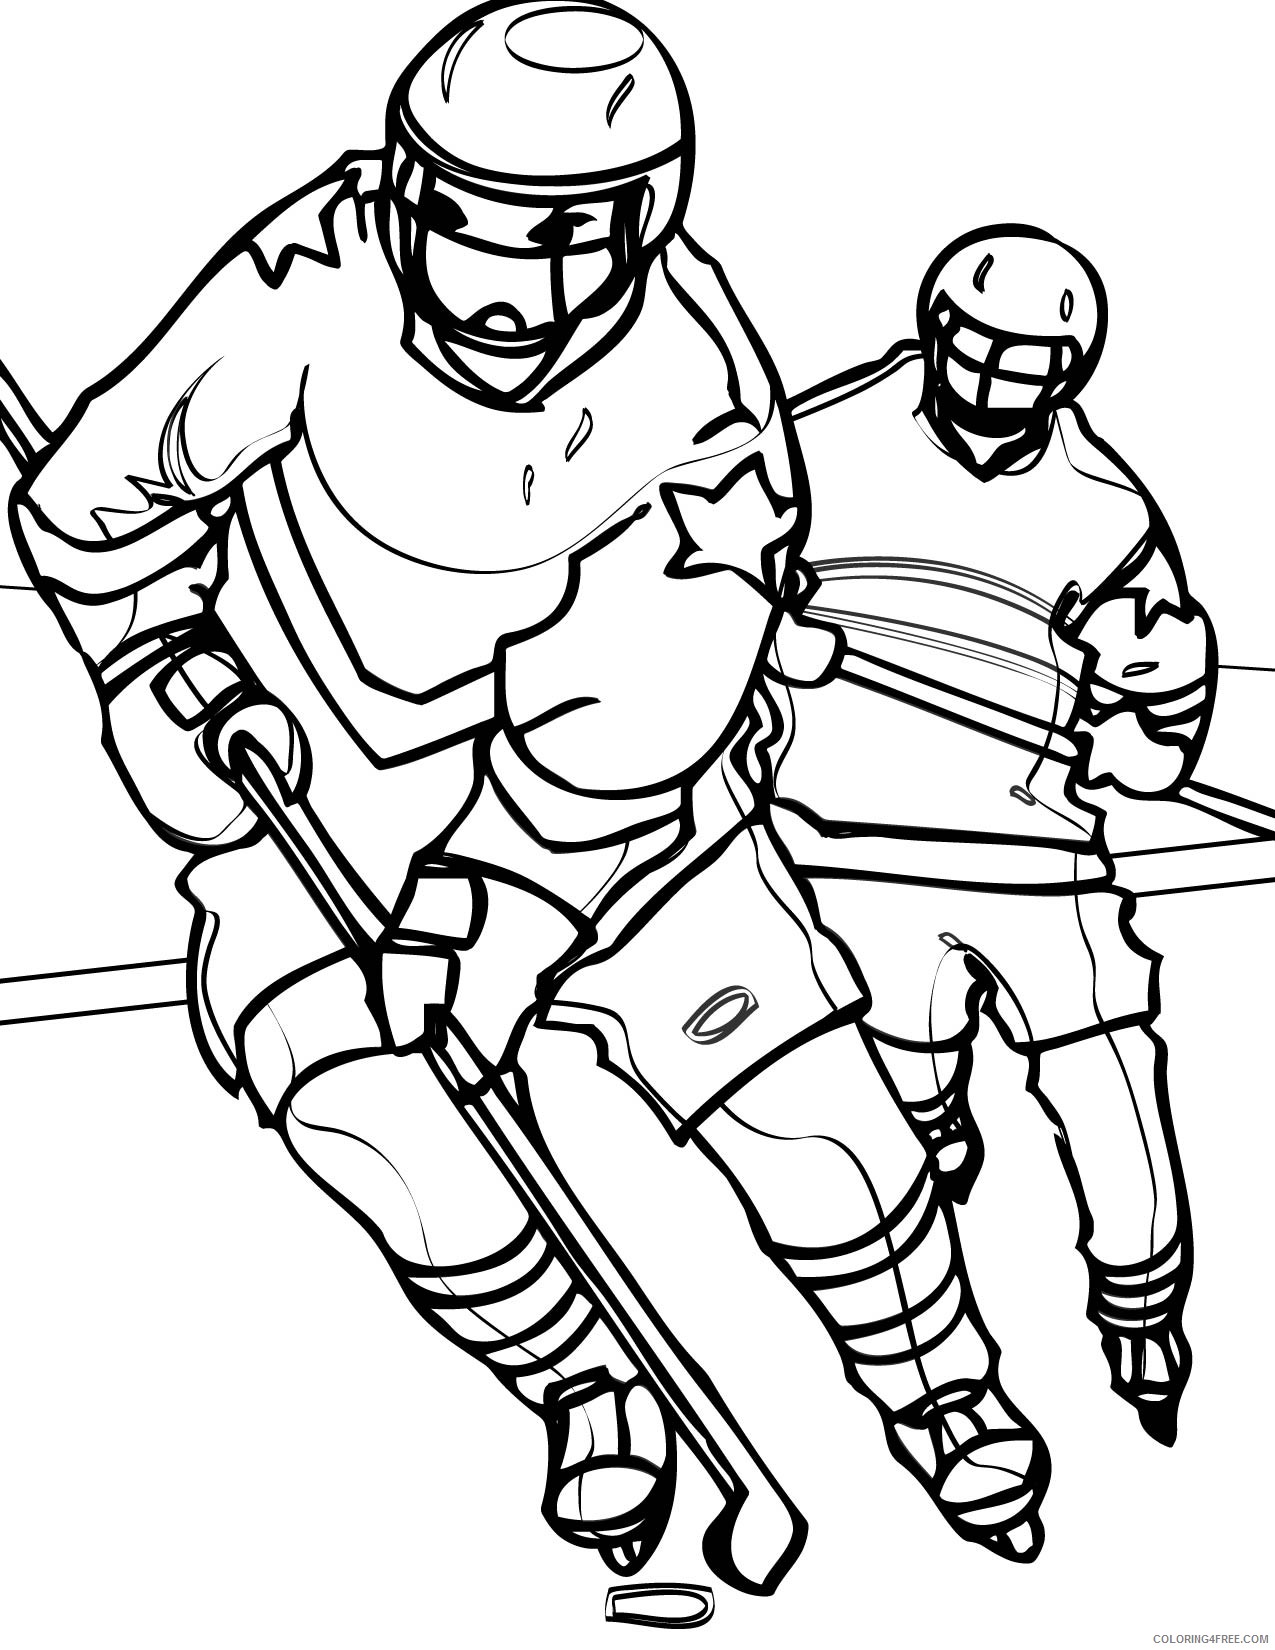 sports coloring pages hockey Coloring4free